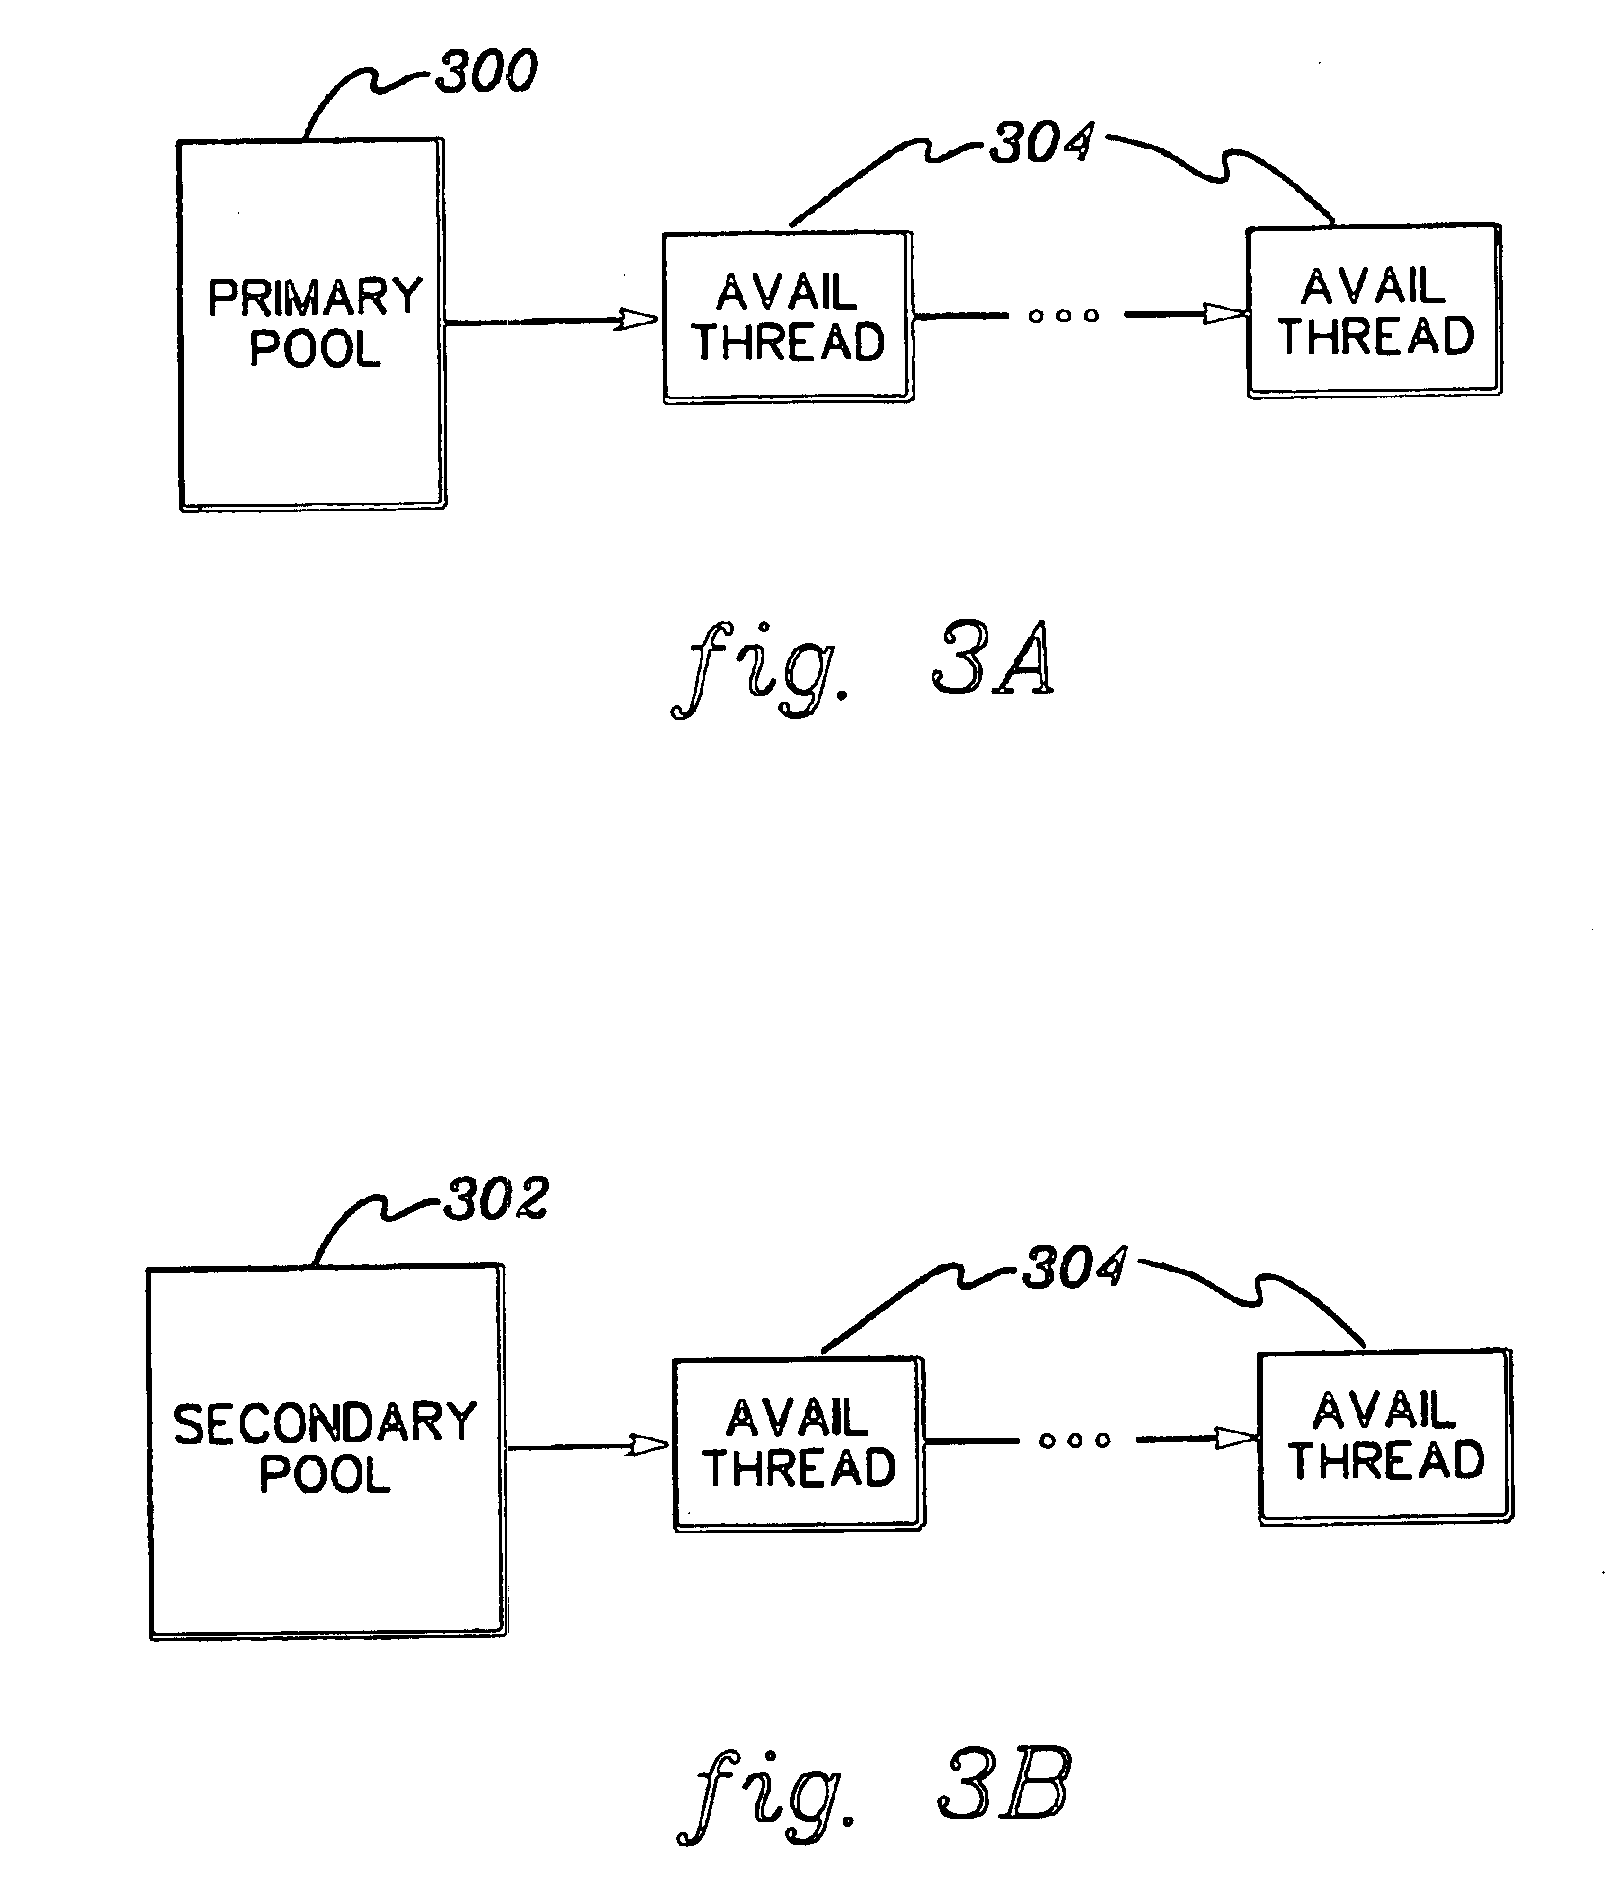 Method, system and program products for managing thread pools of a computing environment to avoid deadlock situations by dynamically altering eligible thread pools